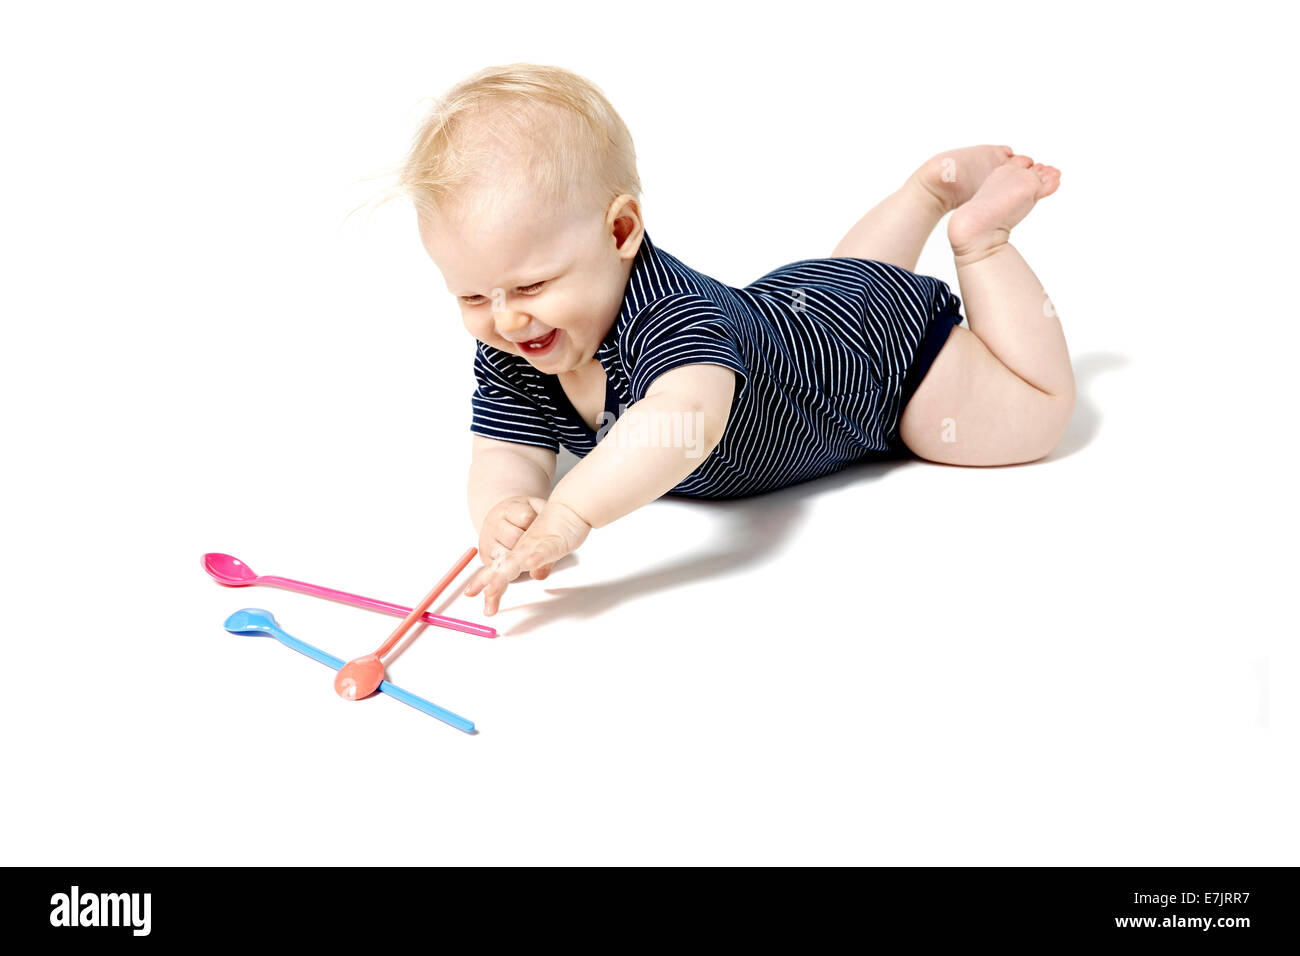 Seven months old baby playing with spoons. Isolated on white background. Stock Photo